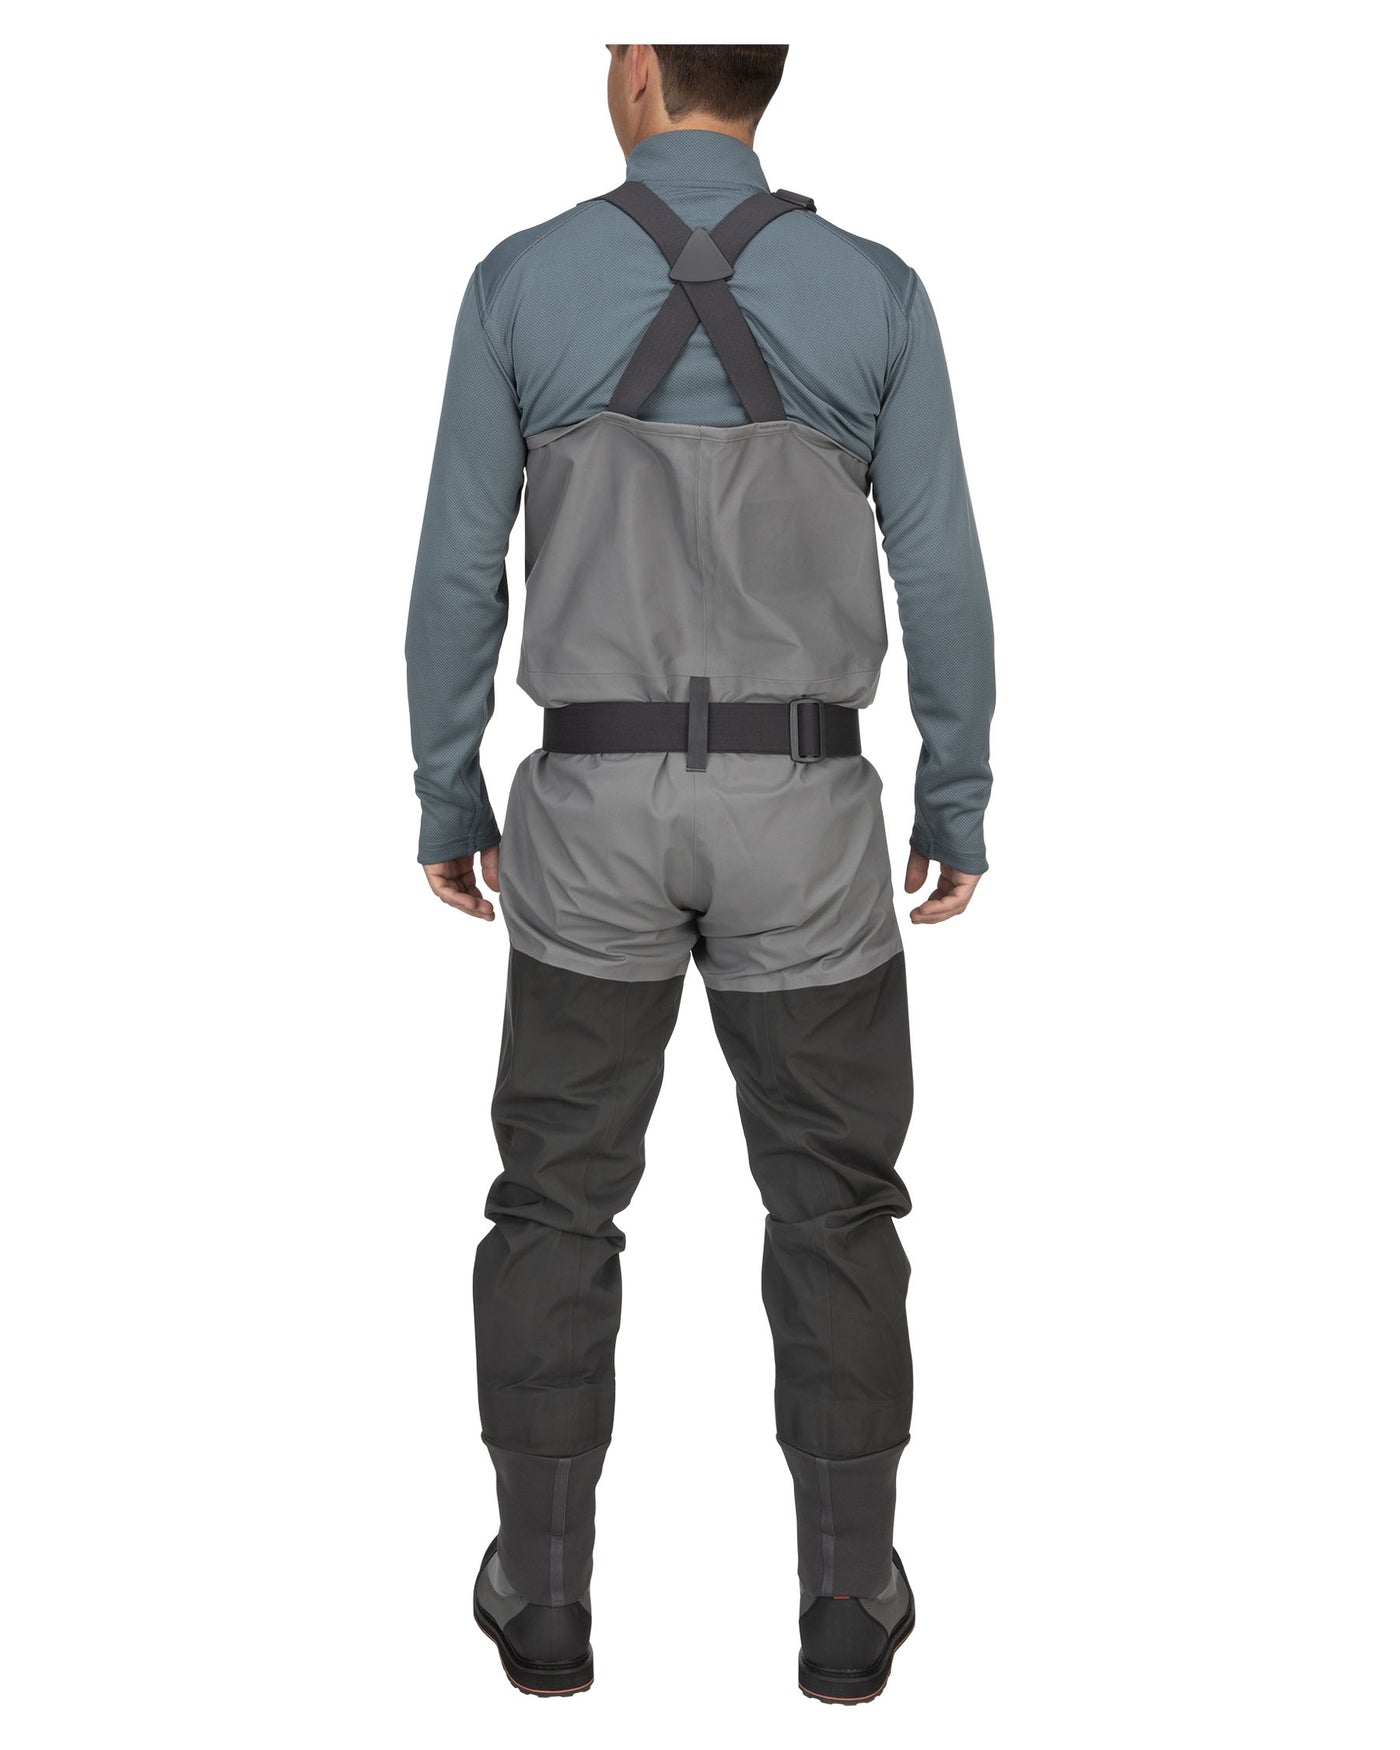 Simms Soul River Stockingfoot Chest Waders for Women, Waterproof